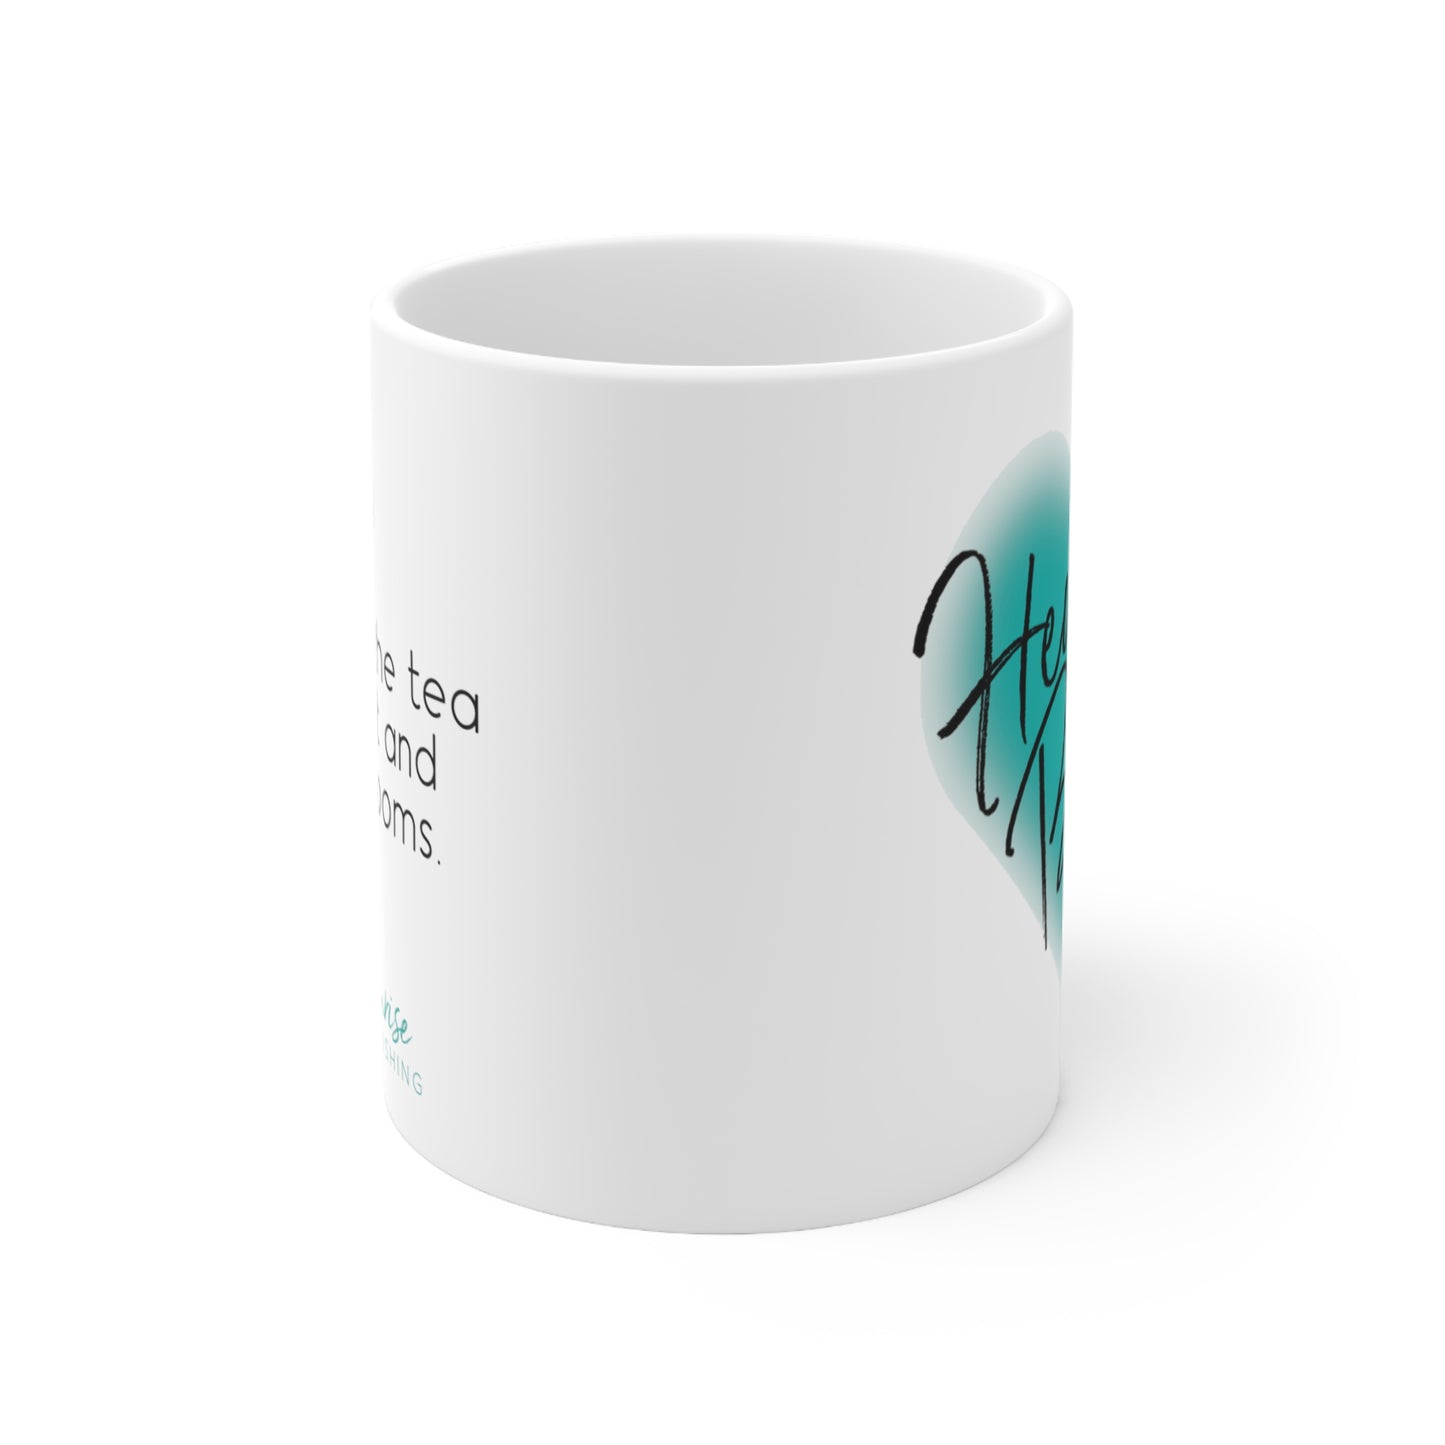 Hearts Bend "Where the tea is sweet and love blooms." - White Mug 11oz